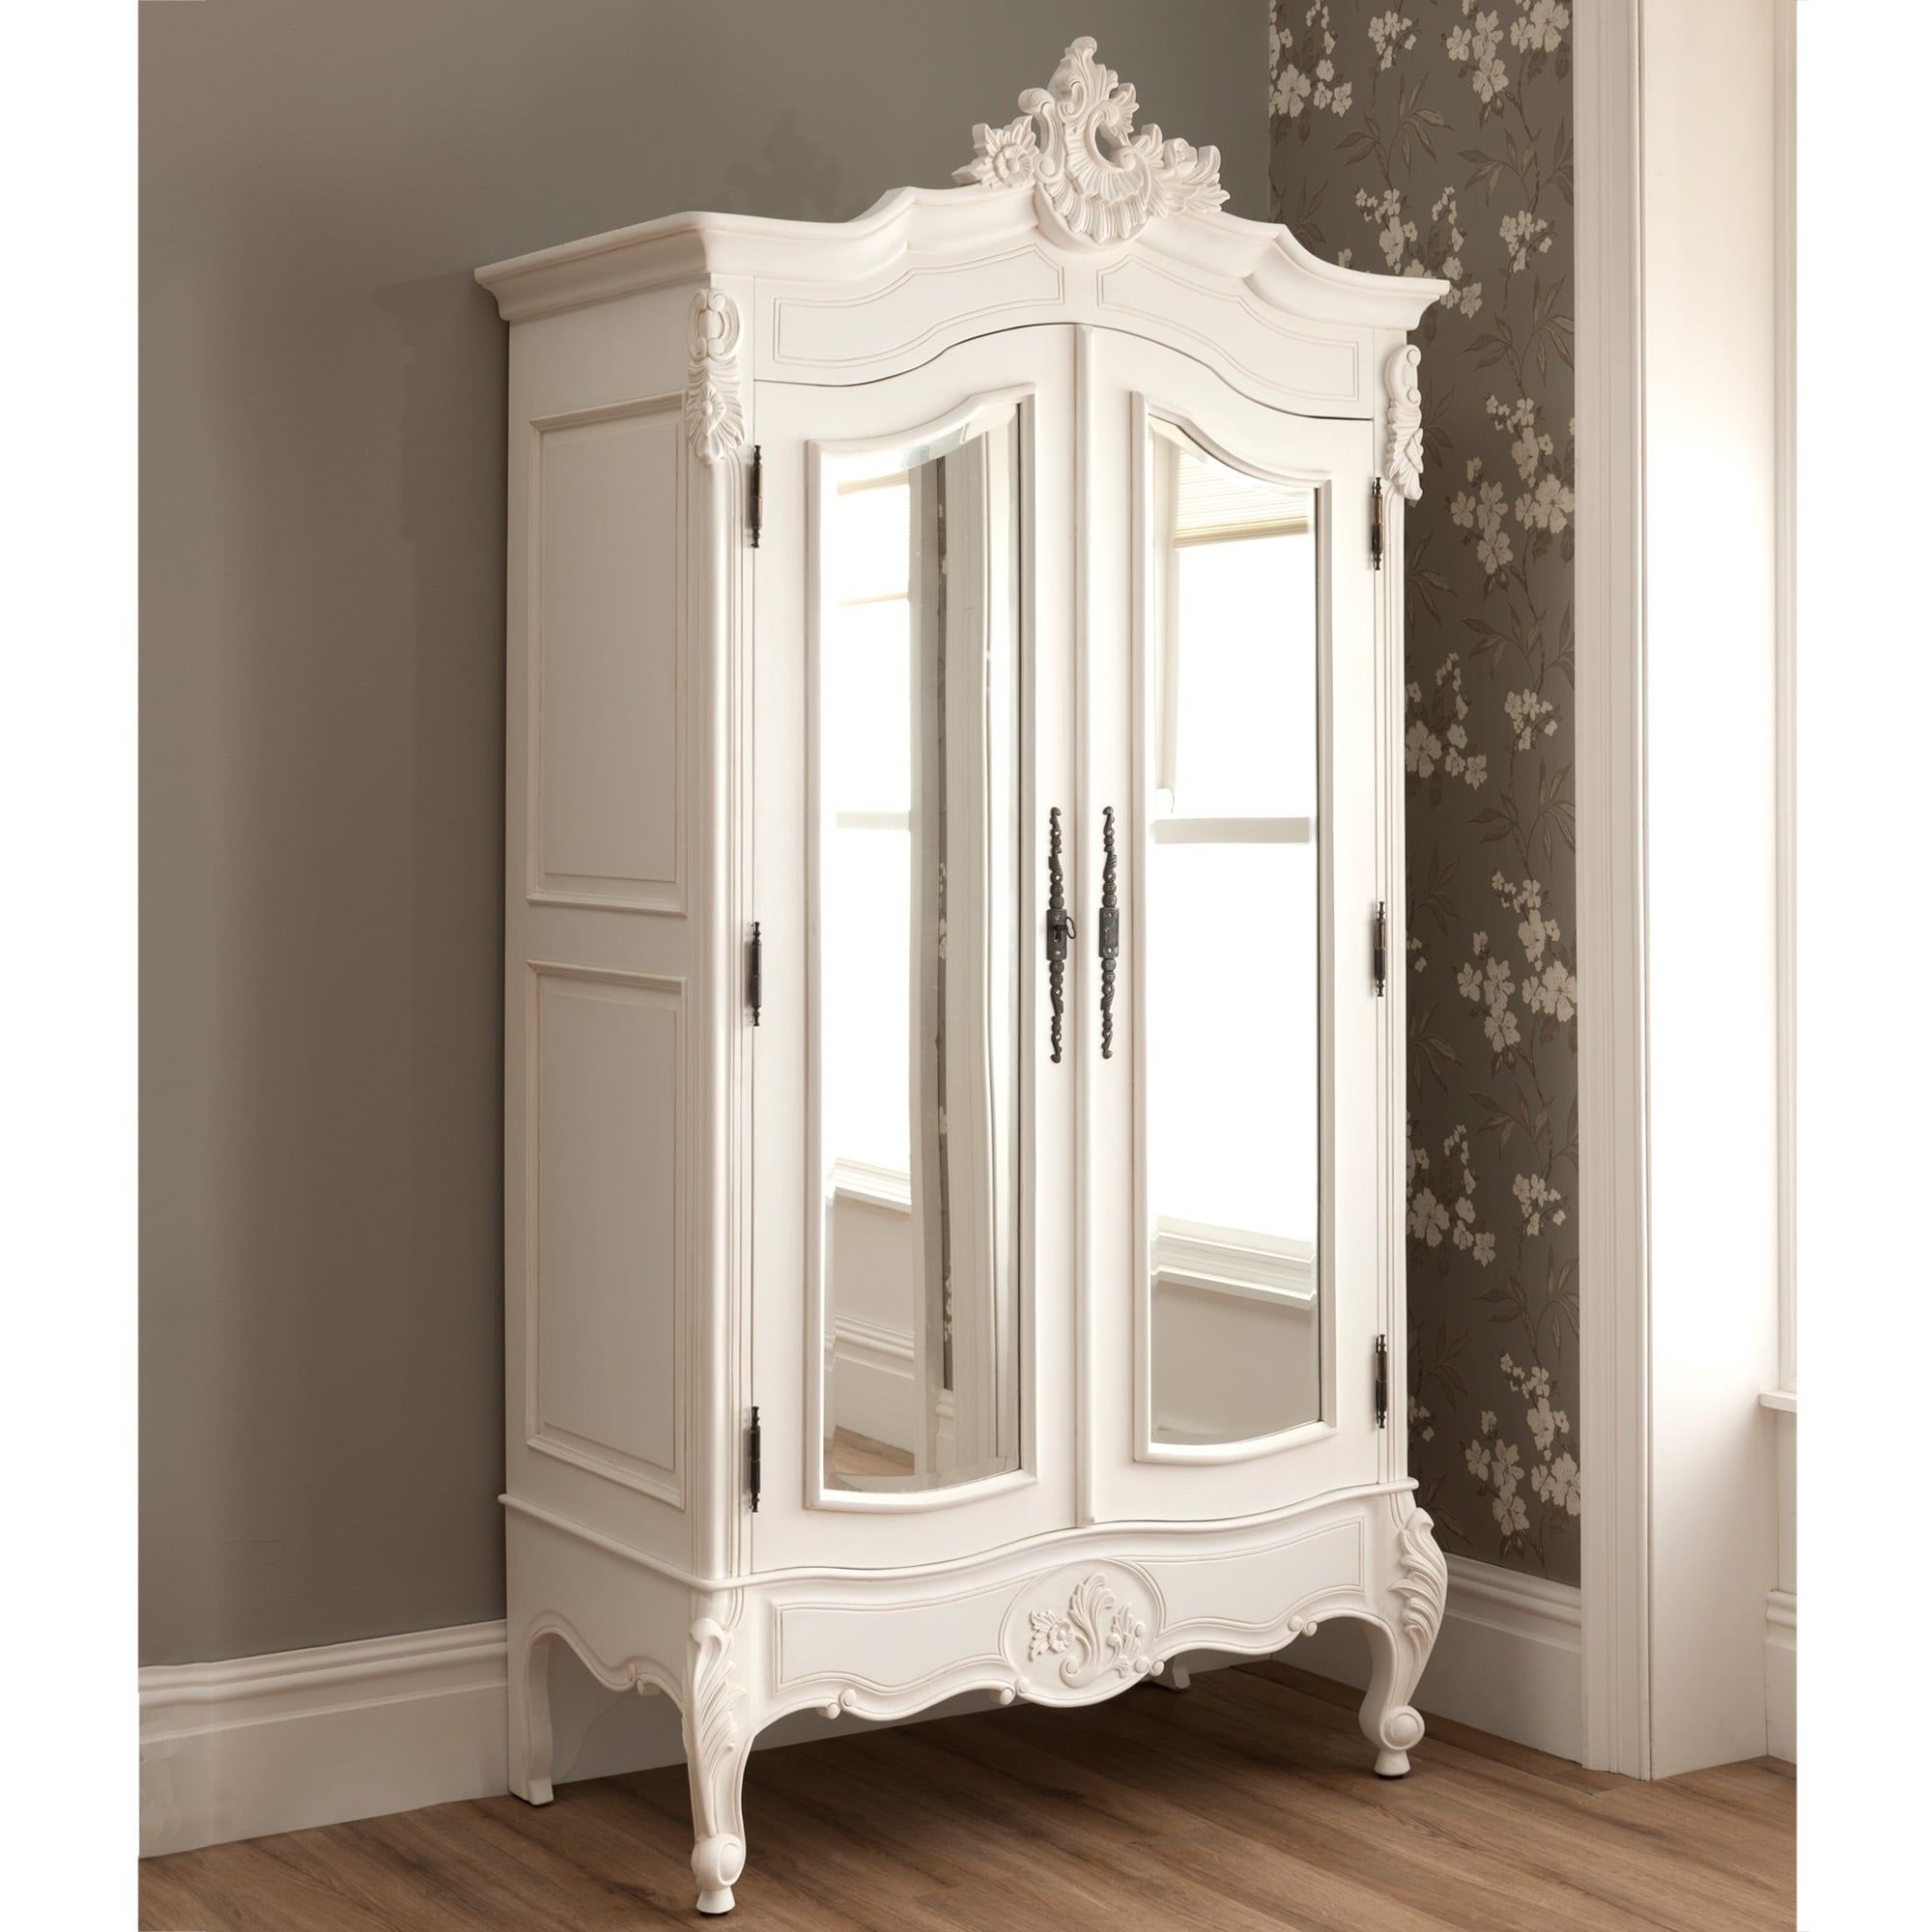 Best And Newest La Rochelle Mirrored Antique French 1 Door Wardrobe With Ornate Wardrobes (View 11 of 15)